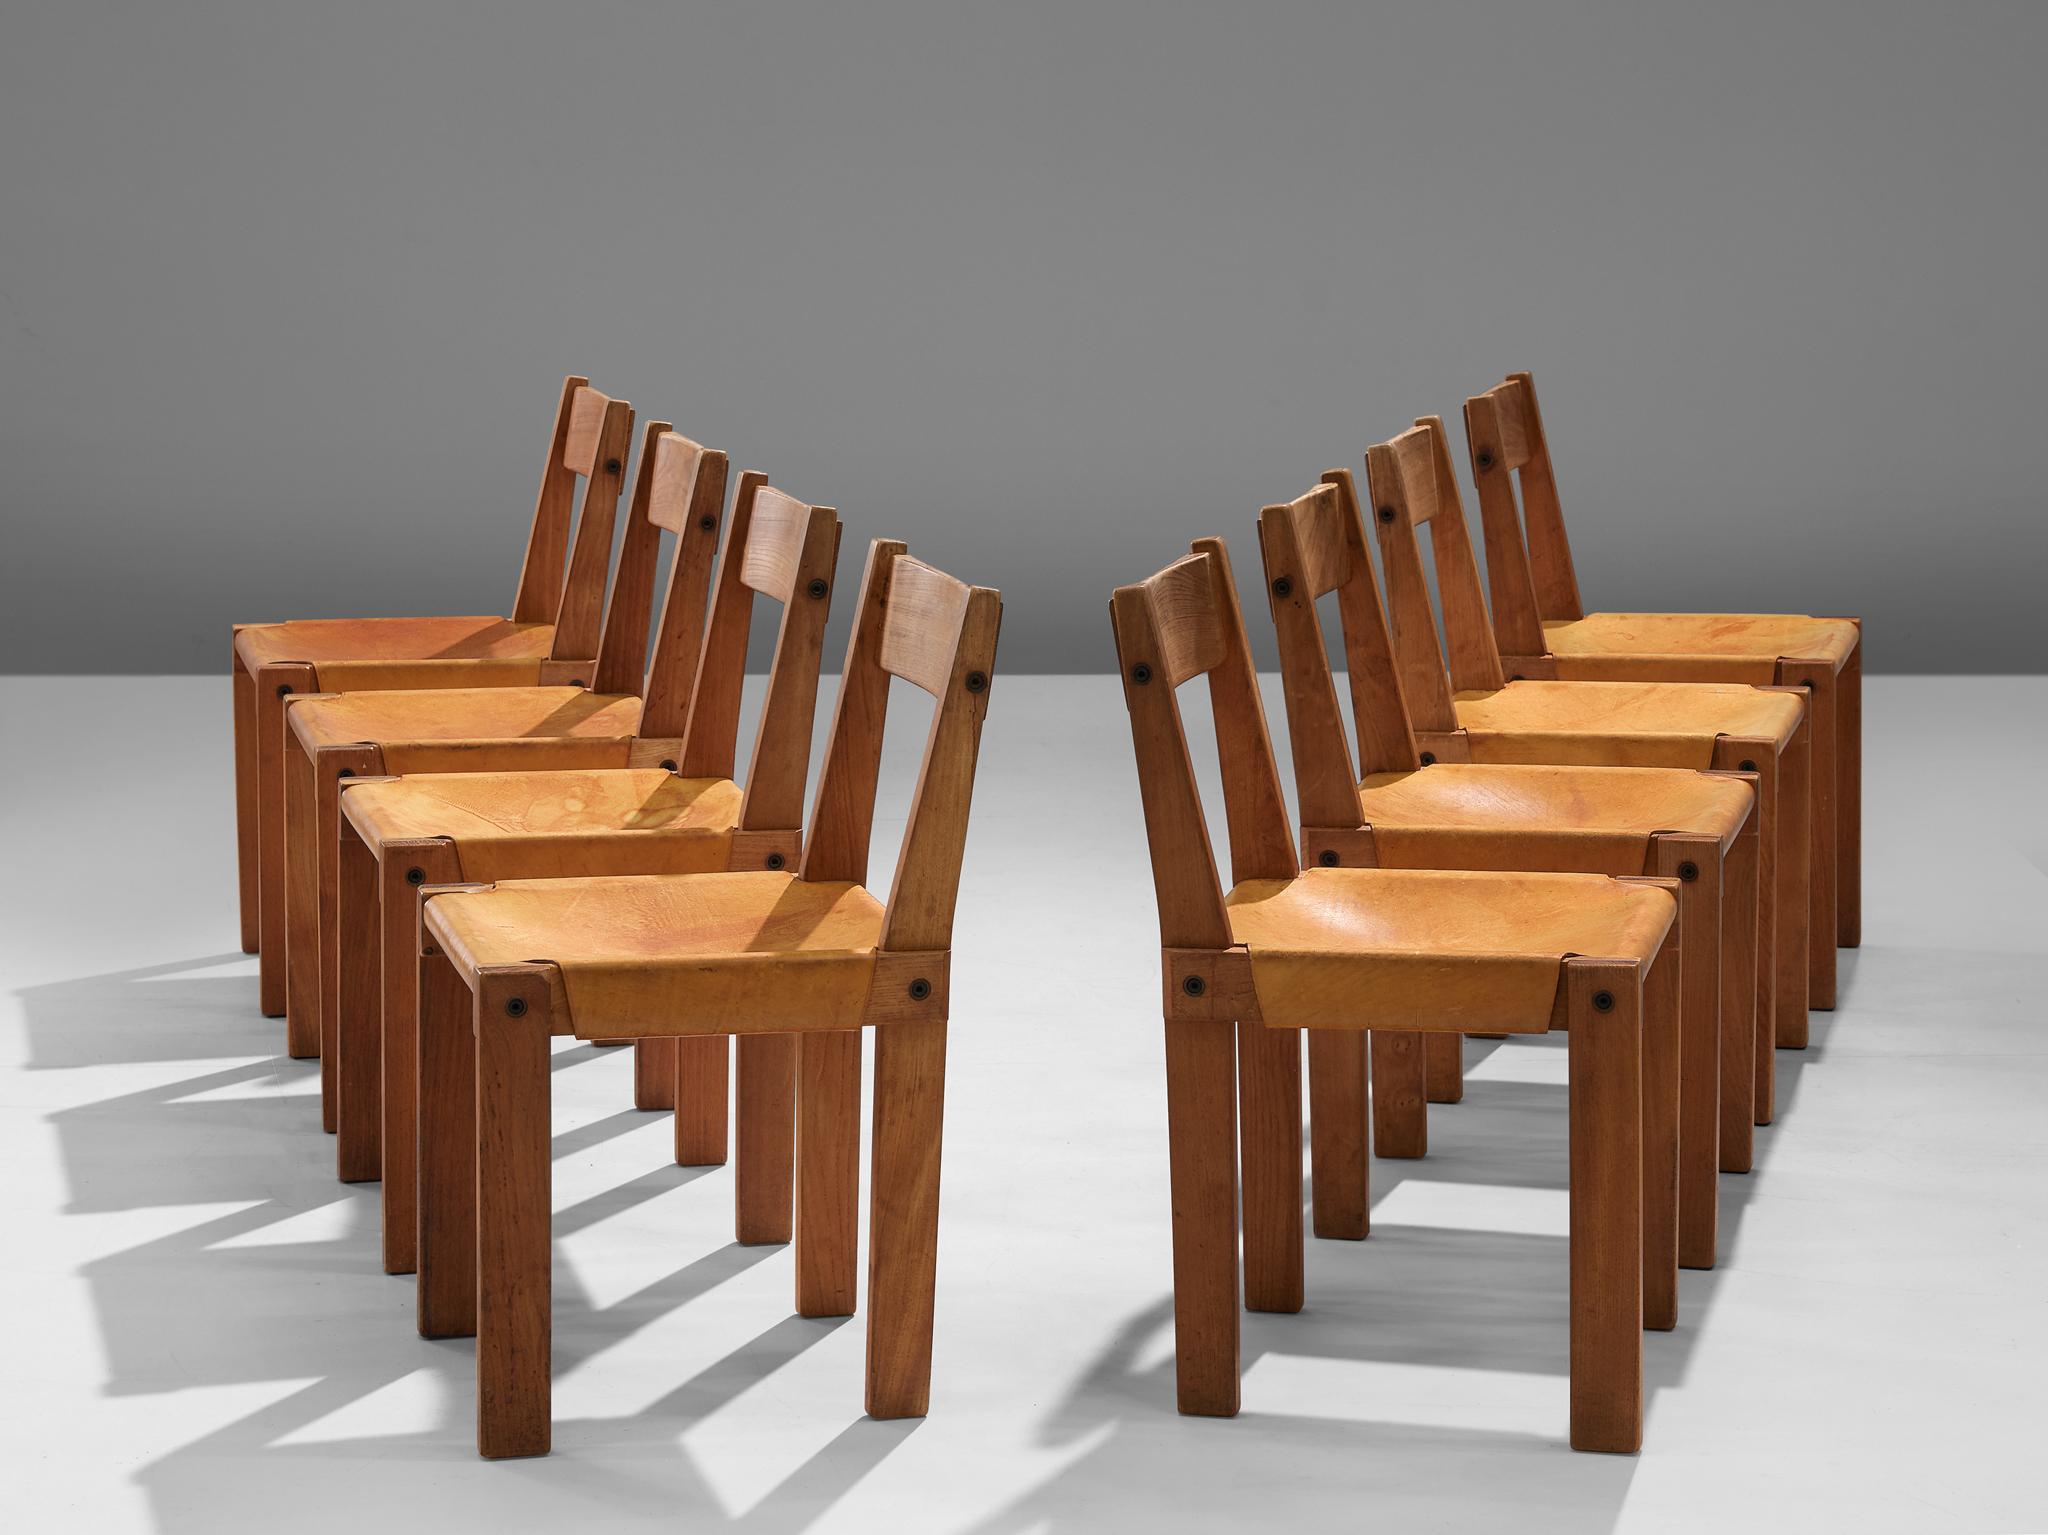 Pierre Chapo, set of eight dining chairs, model S24, elm and leather, France, circa 1966.

A set of 8 chairs in solid elmwood with saddle leather seating and back. Designed by French designer Pierre Chapo in Paris. These chairs have a cubic design